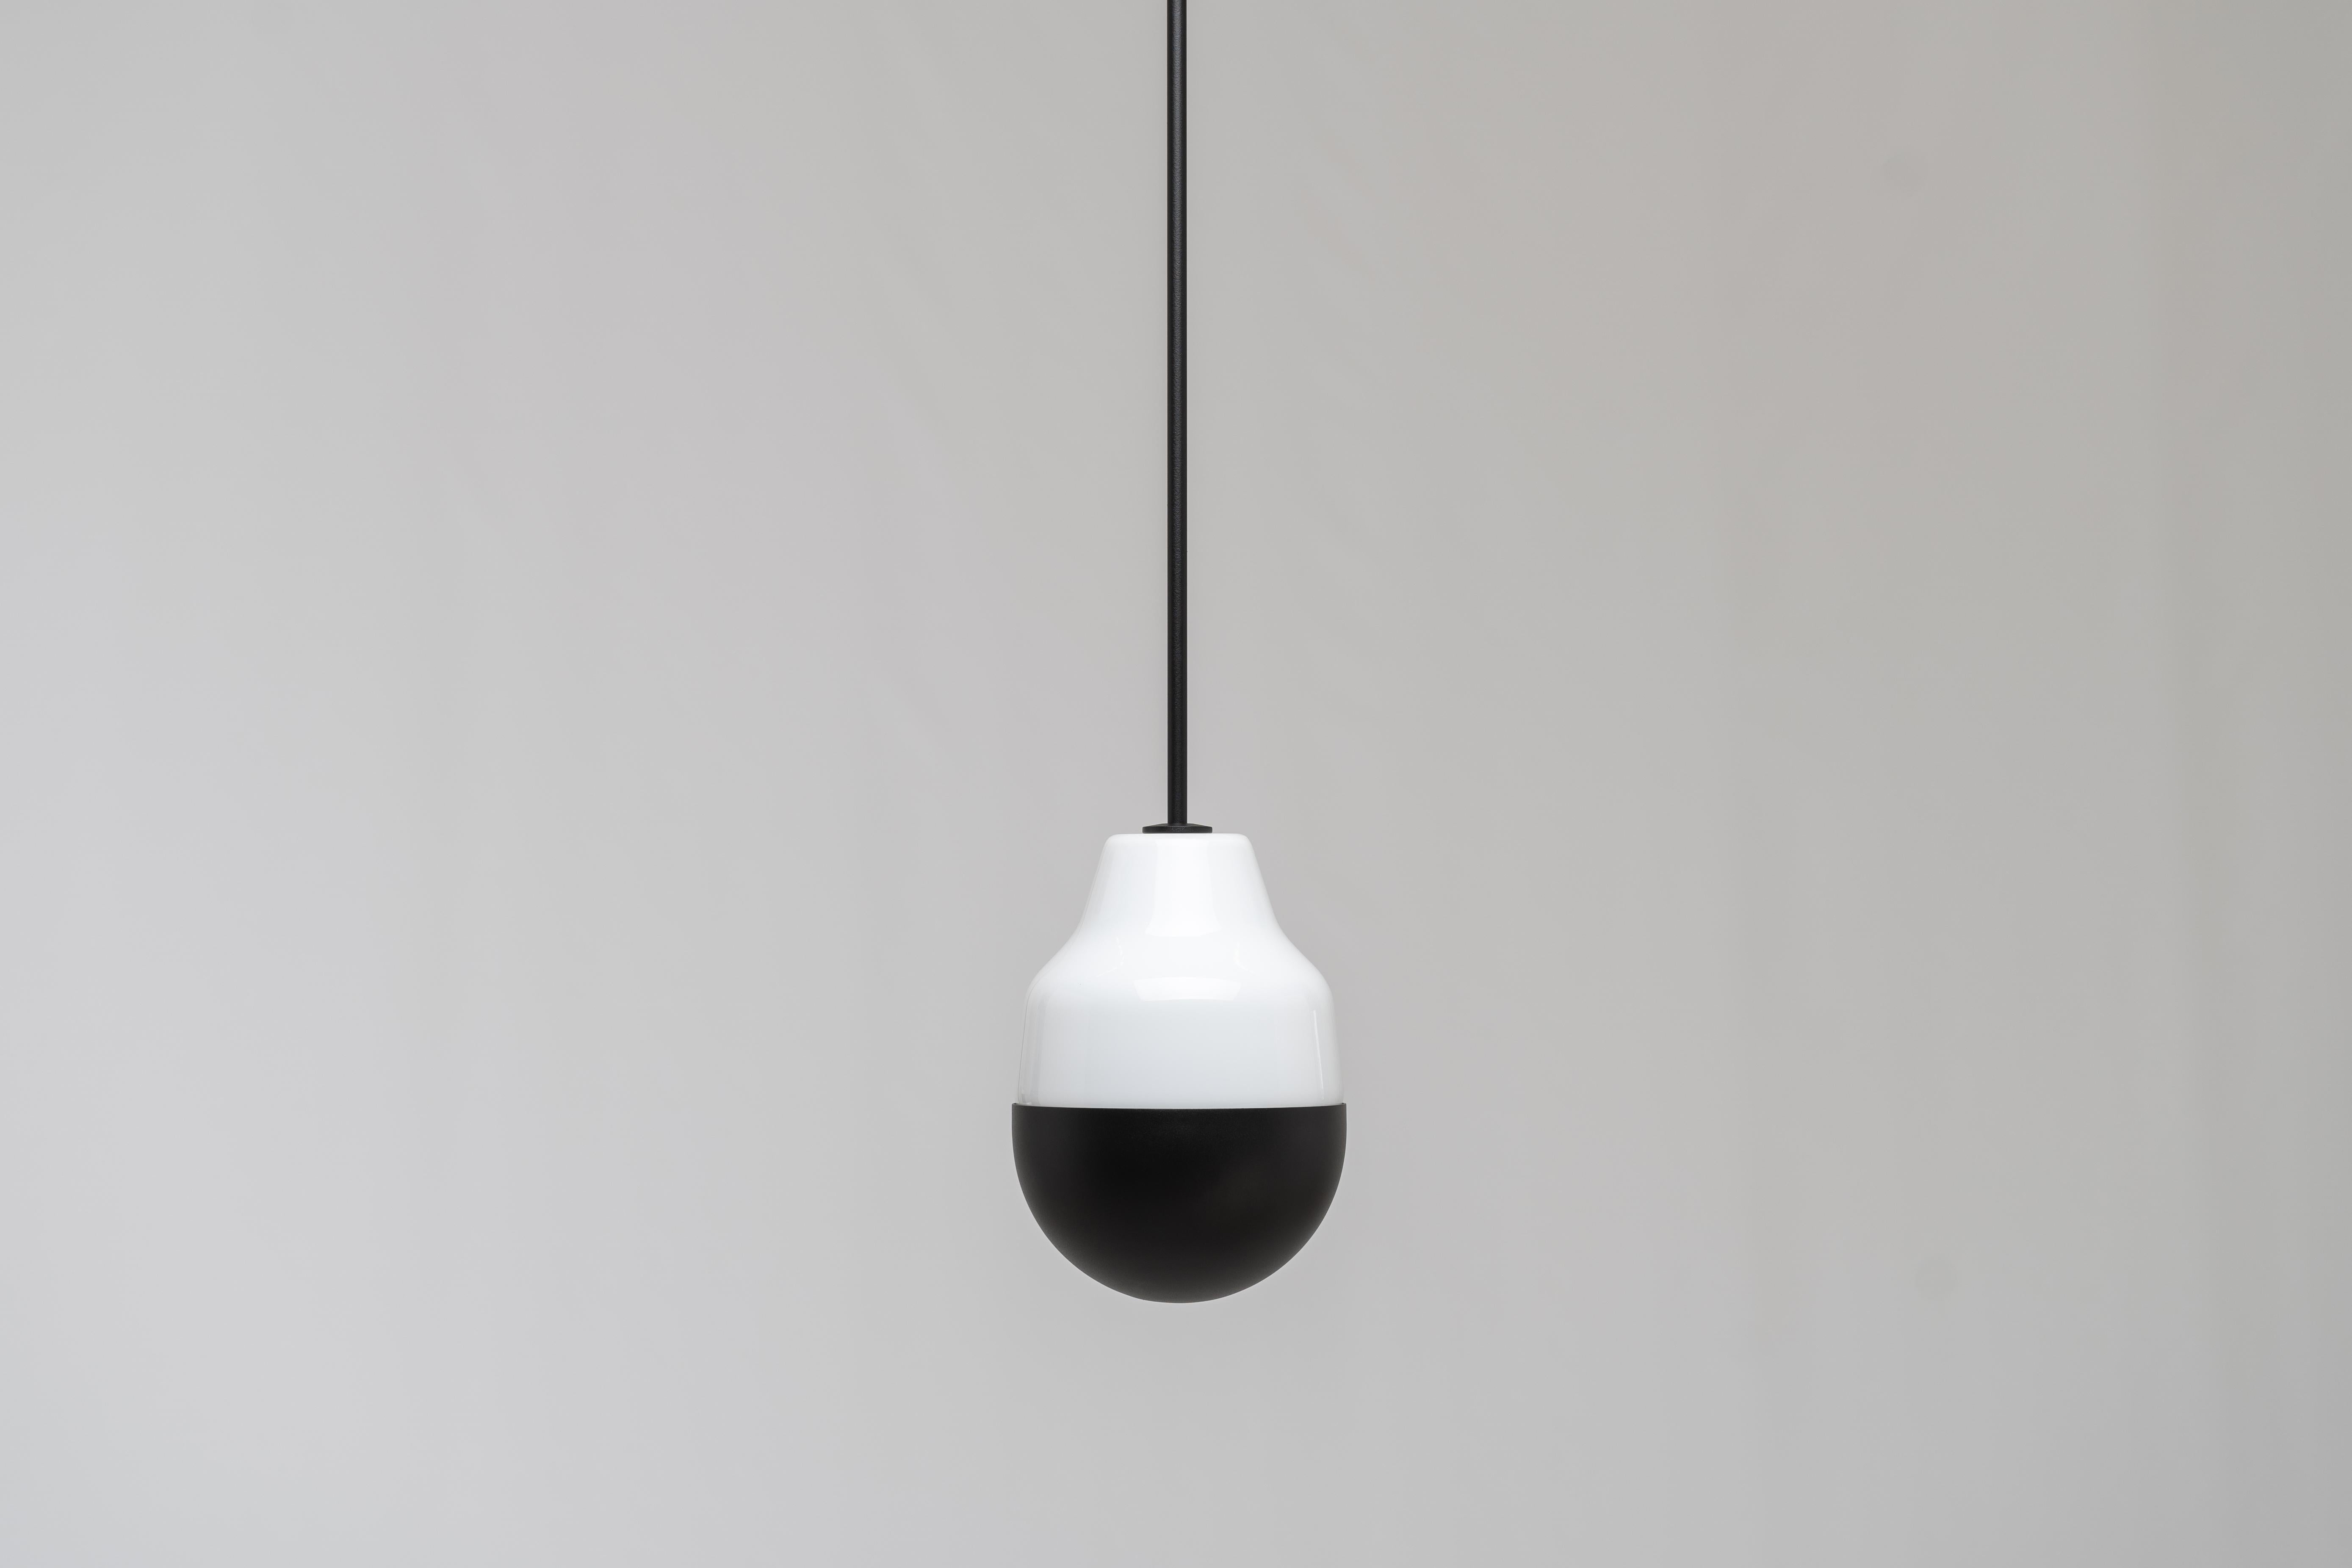 Ambiguo type-02 by Saarepera & Mae
Pendant lamp

Materials: mouth-blown Murano glass / stainless steel and aluminum
Light source: Built-in LED 100-240V / Dimmable

Dimensions: 
H 23.6cm / 9.3 in
D 17cm / 6.7 in

Fixing: 
Hanging from a